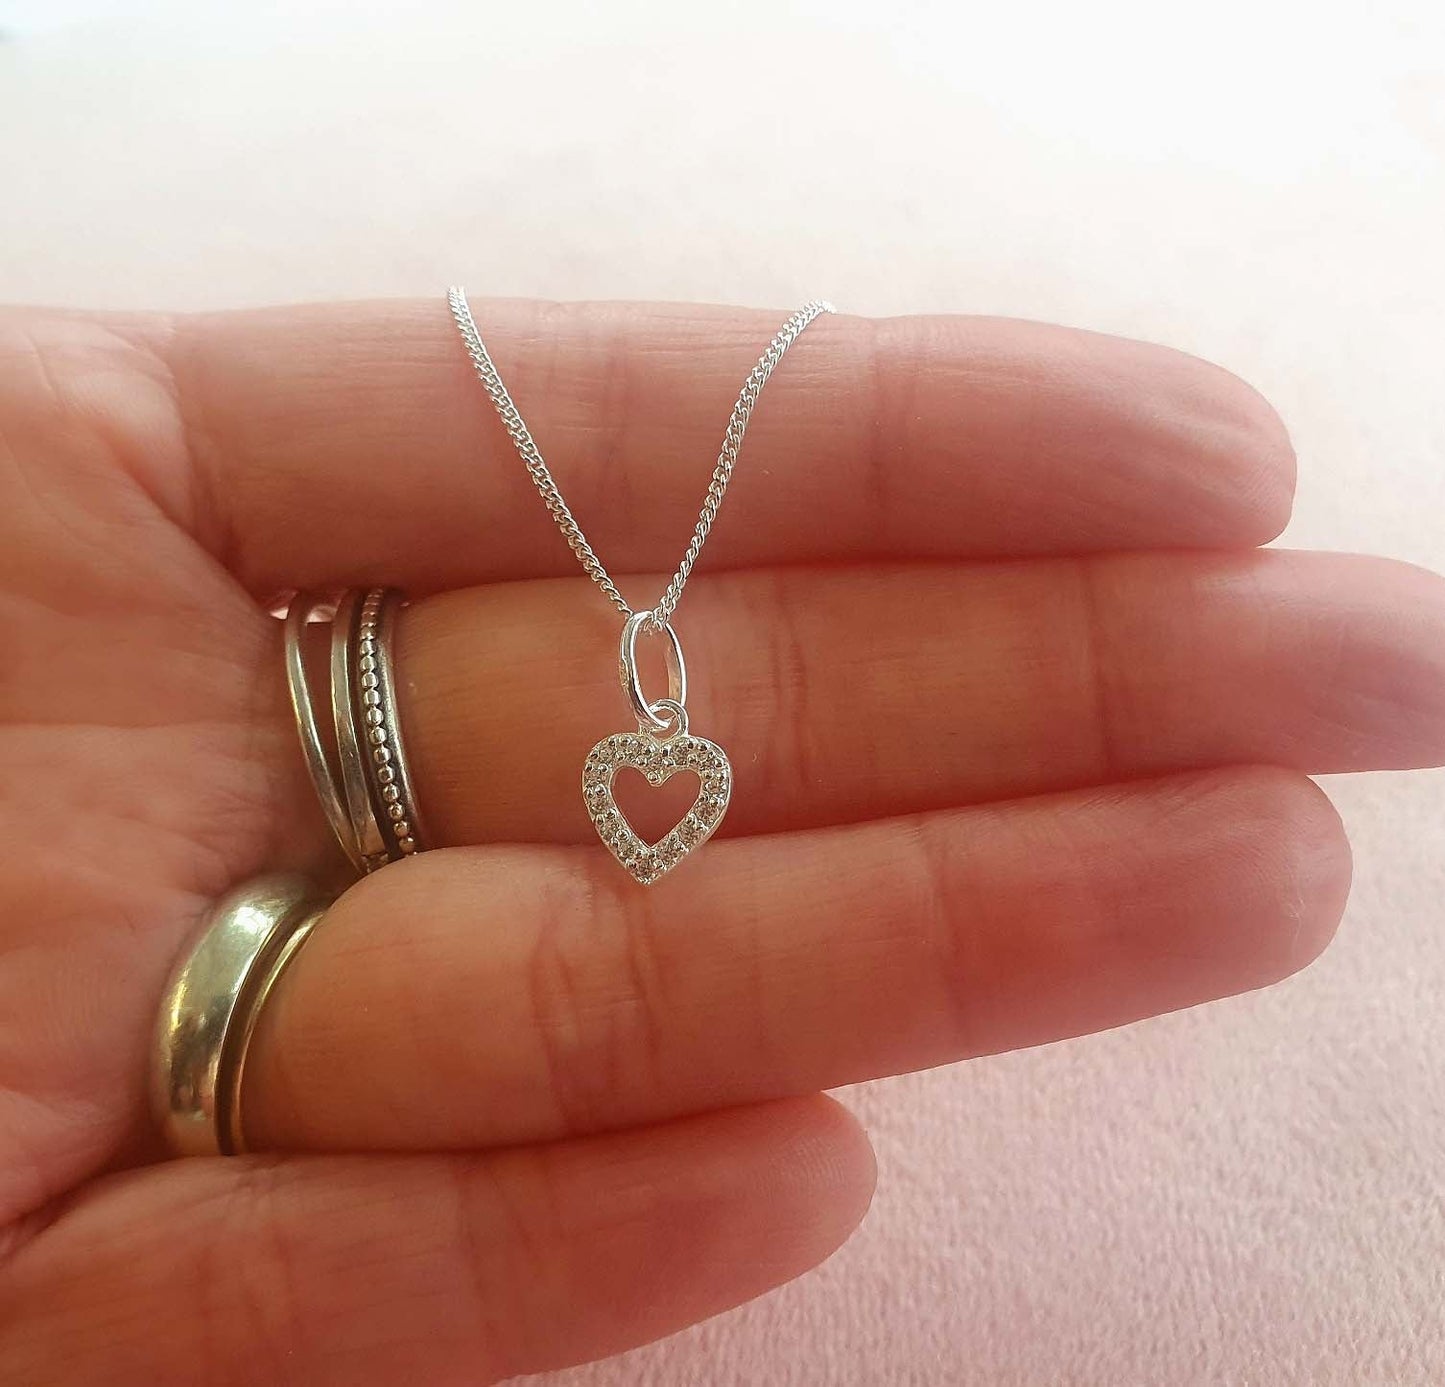 Nana of the Groom Heart Necklace with Cubic Zirconia in Sterling Silver 925, Personalised Gift